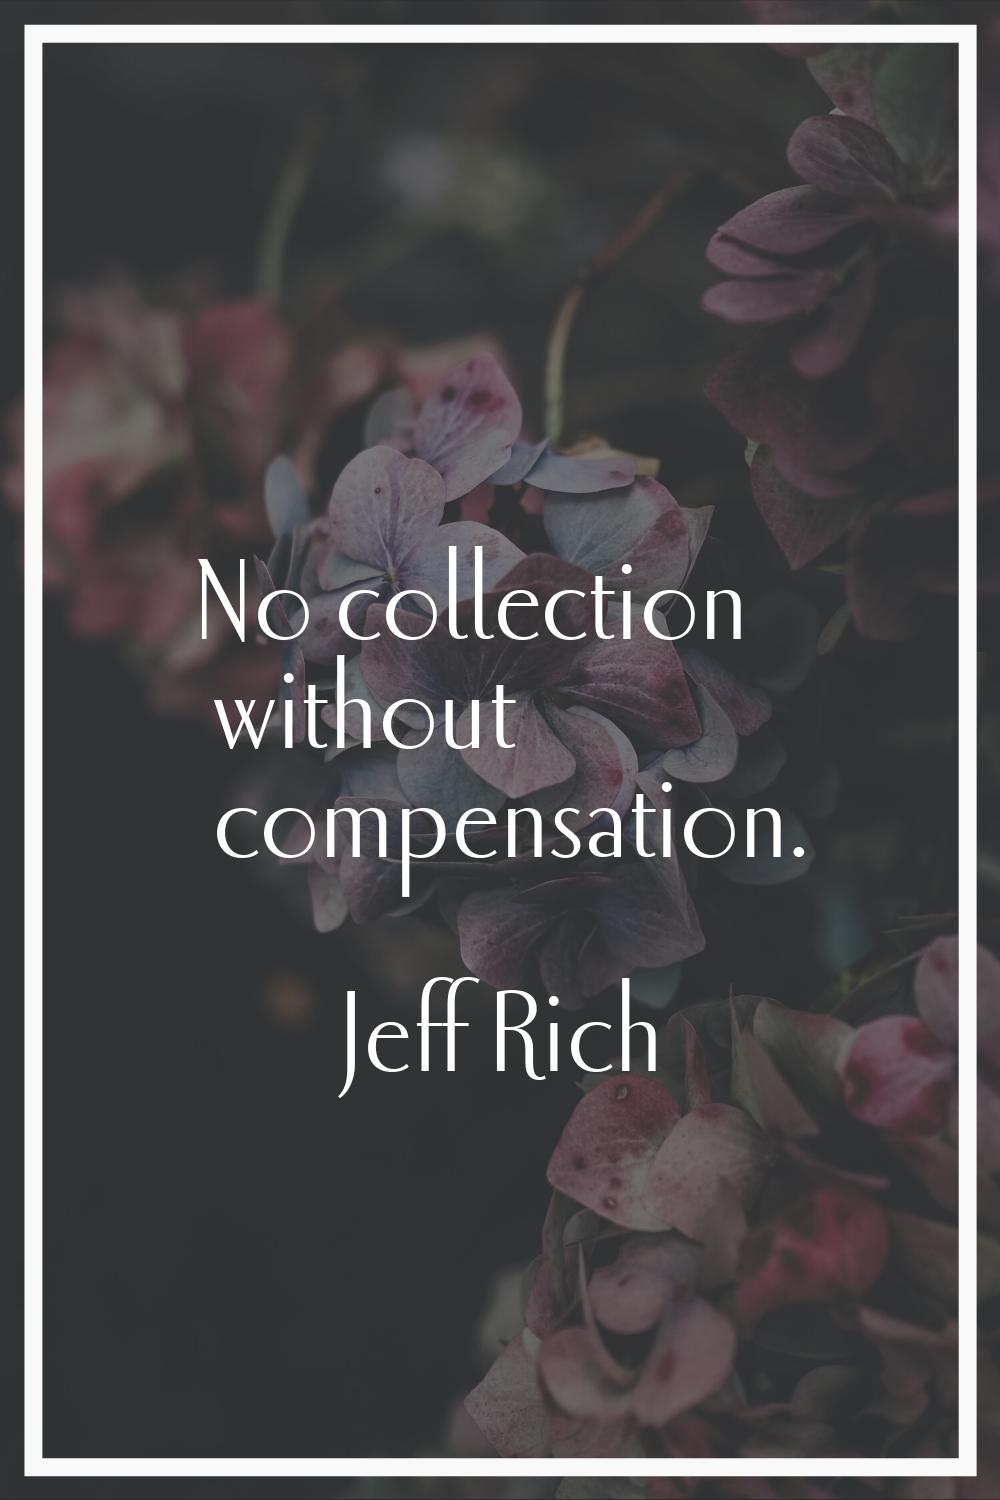 No collection without compensation.